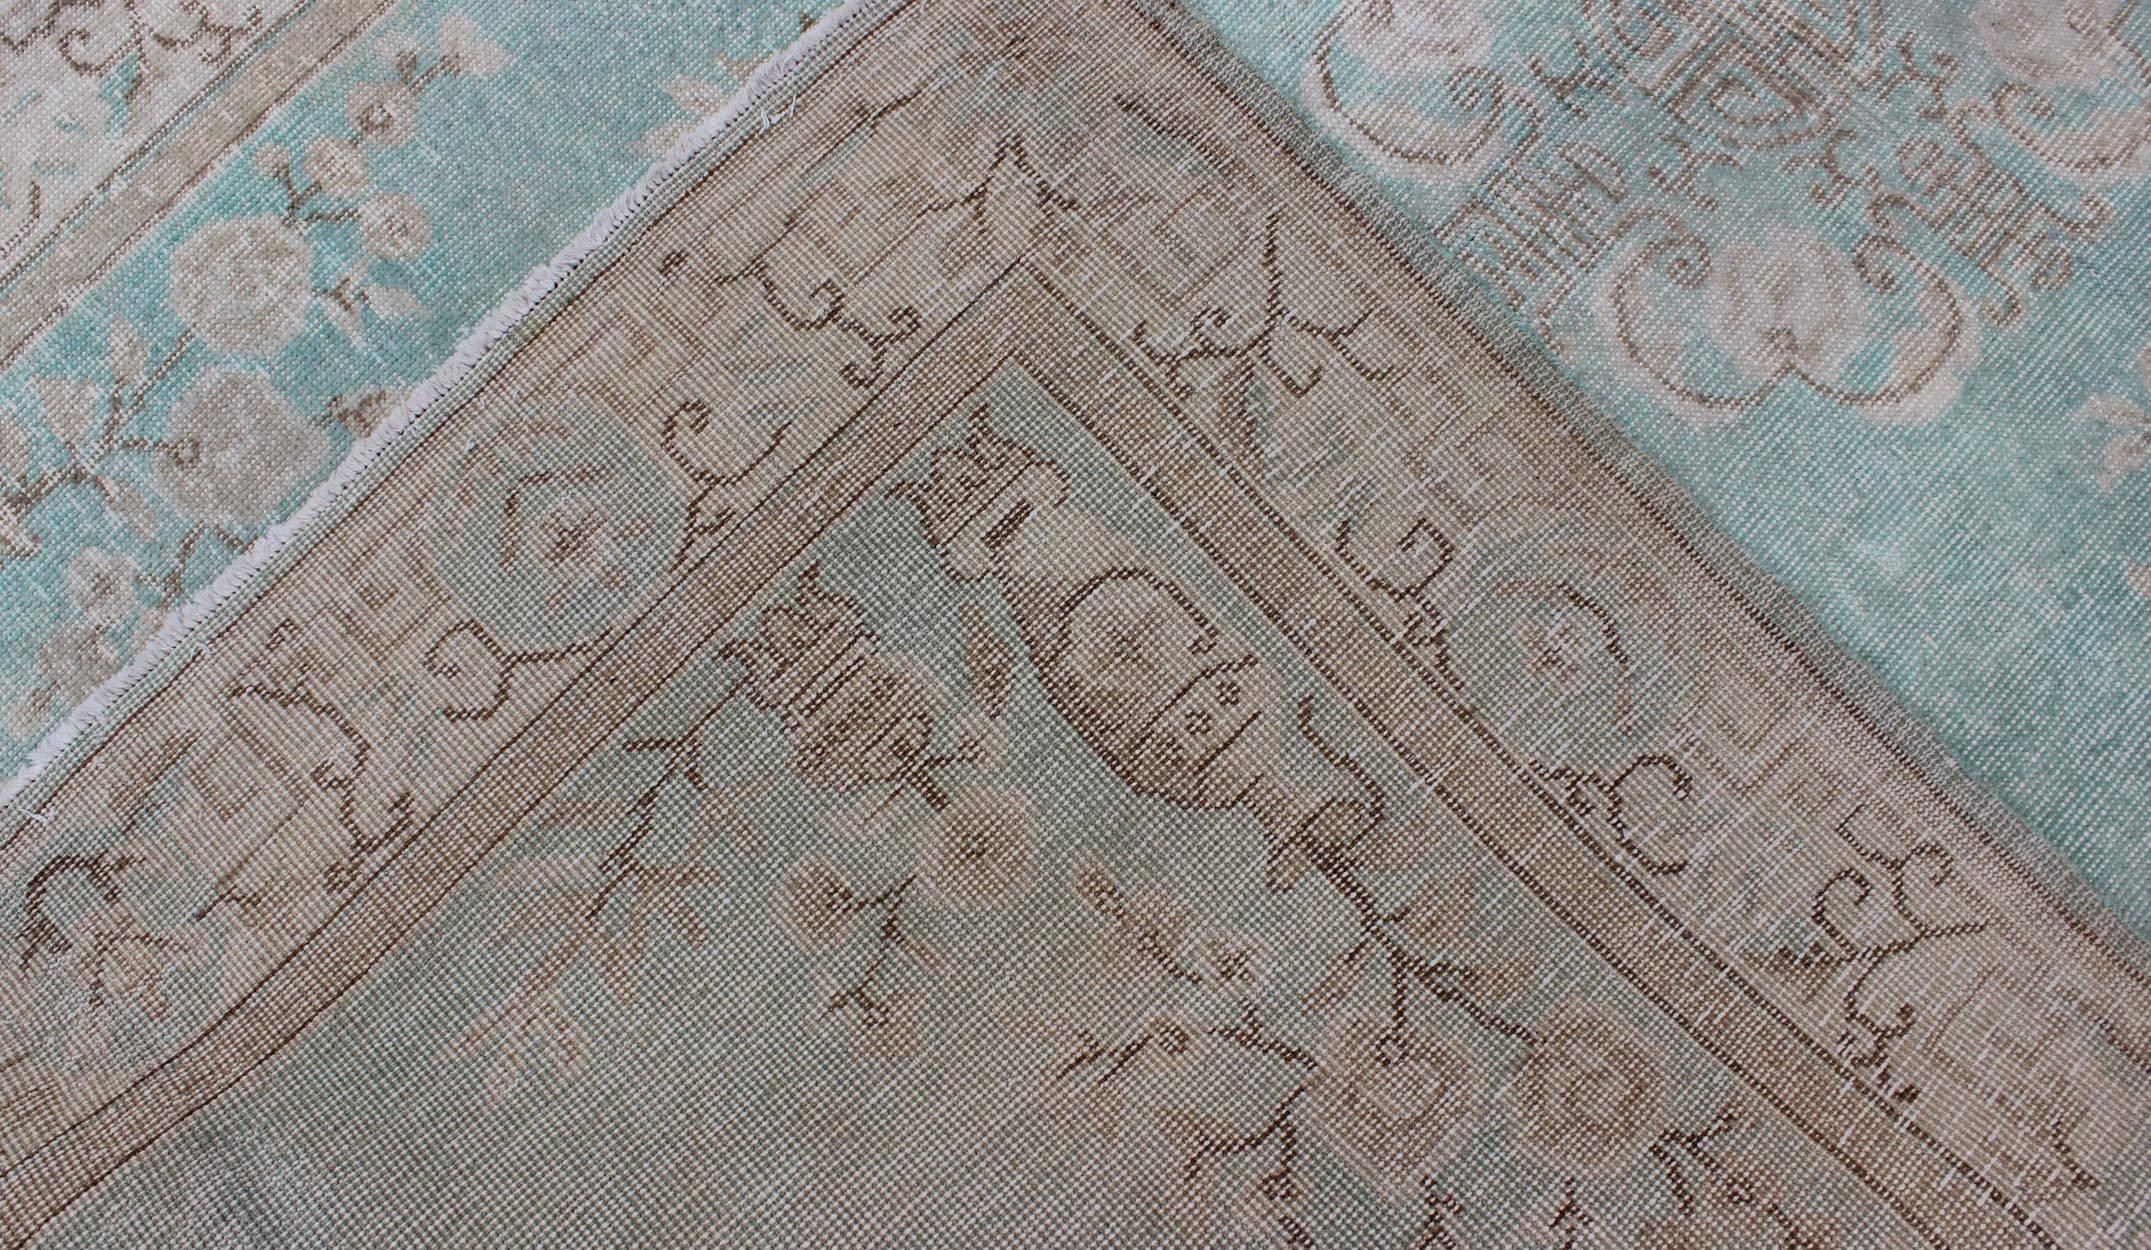 Wool Vintage Turkish Rug with Khotan Design in Sea Foam Blue, Taupe and Light Brown For Sale